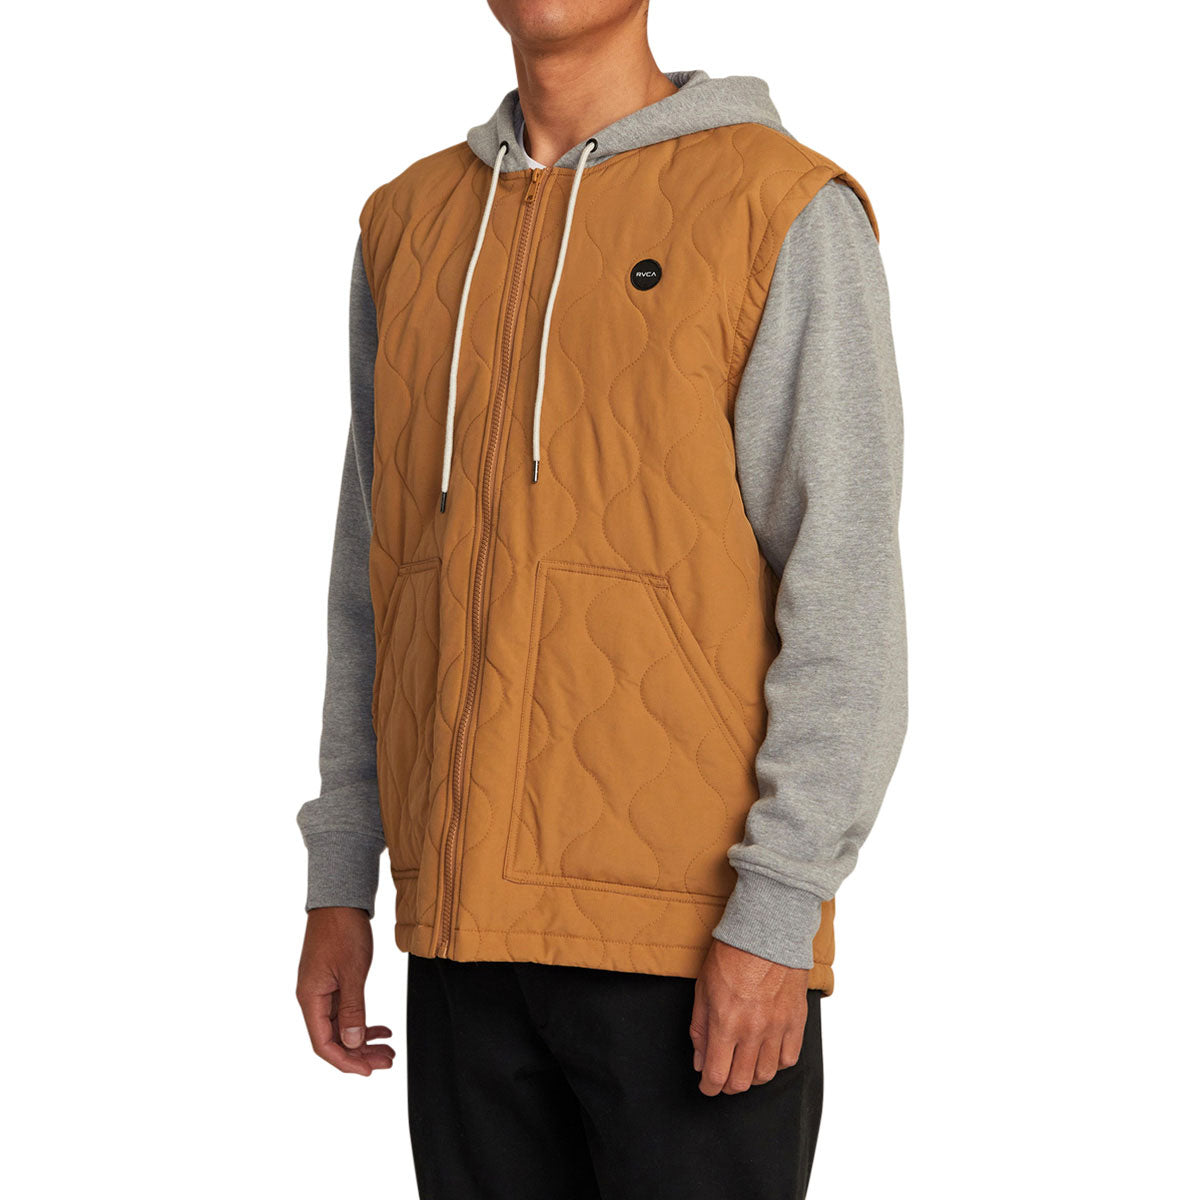 RVCA Grant Puffer Jacket - Camel image 3